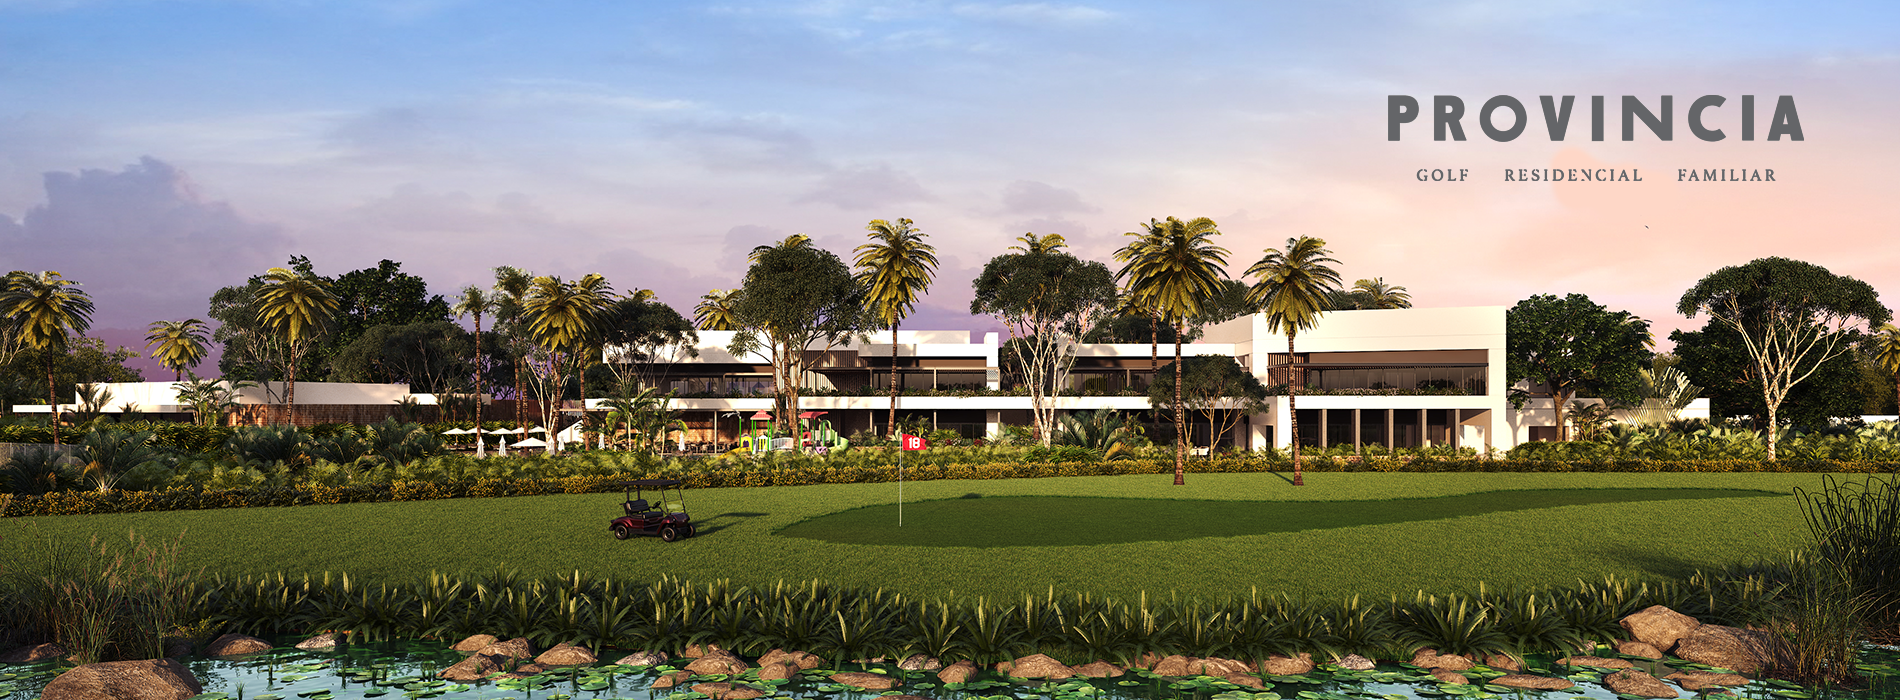 Provincia Residencial - Golf Goodlers